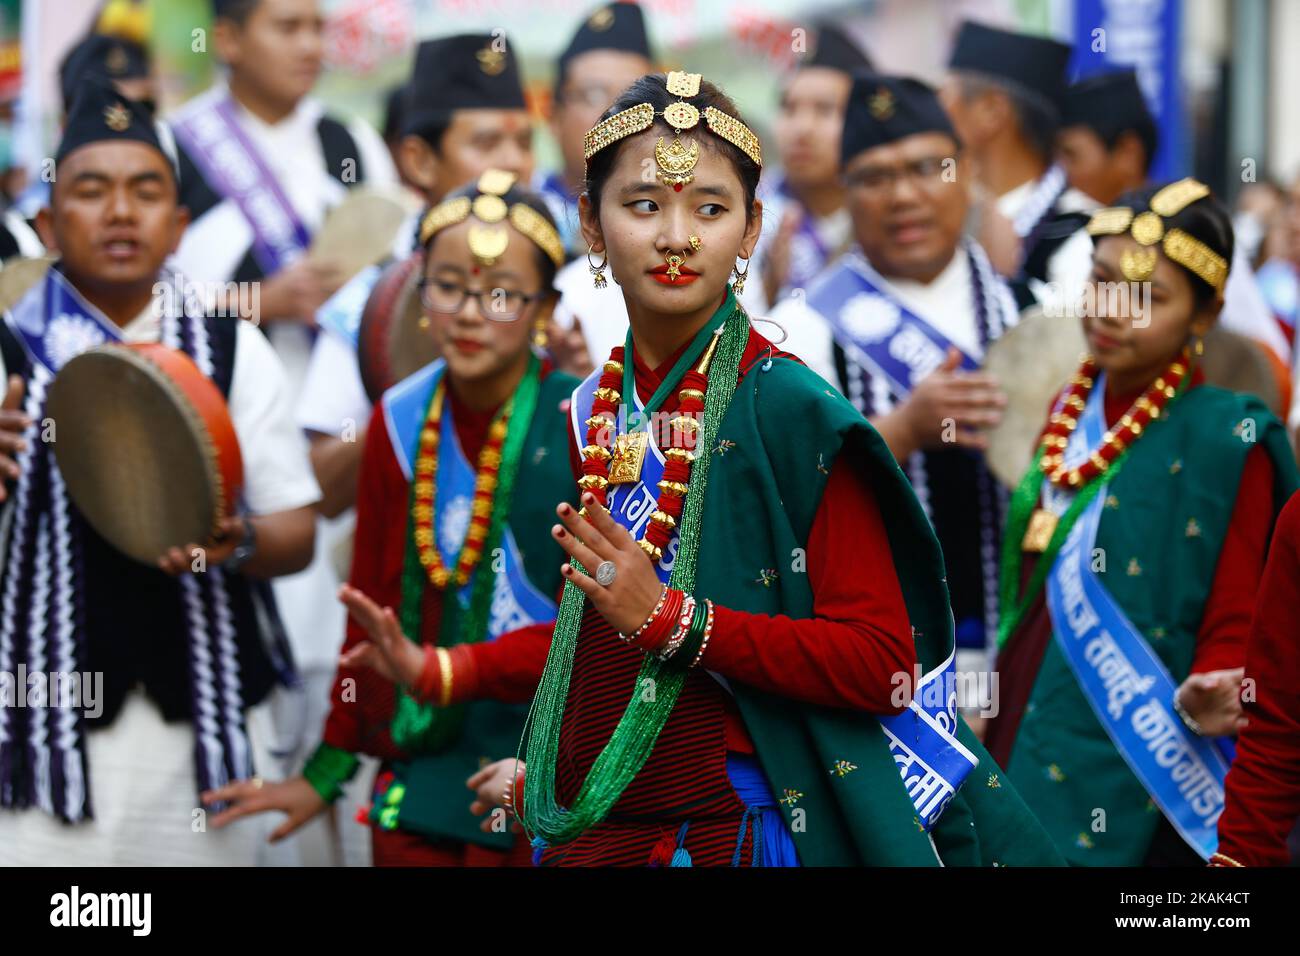 Nepalese From Ethnic Gurung Community In Traditional Attire Dance While Taking Part In Parade To